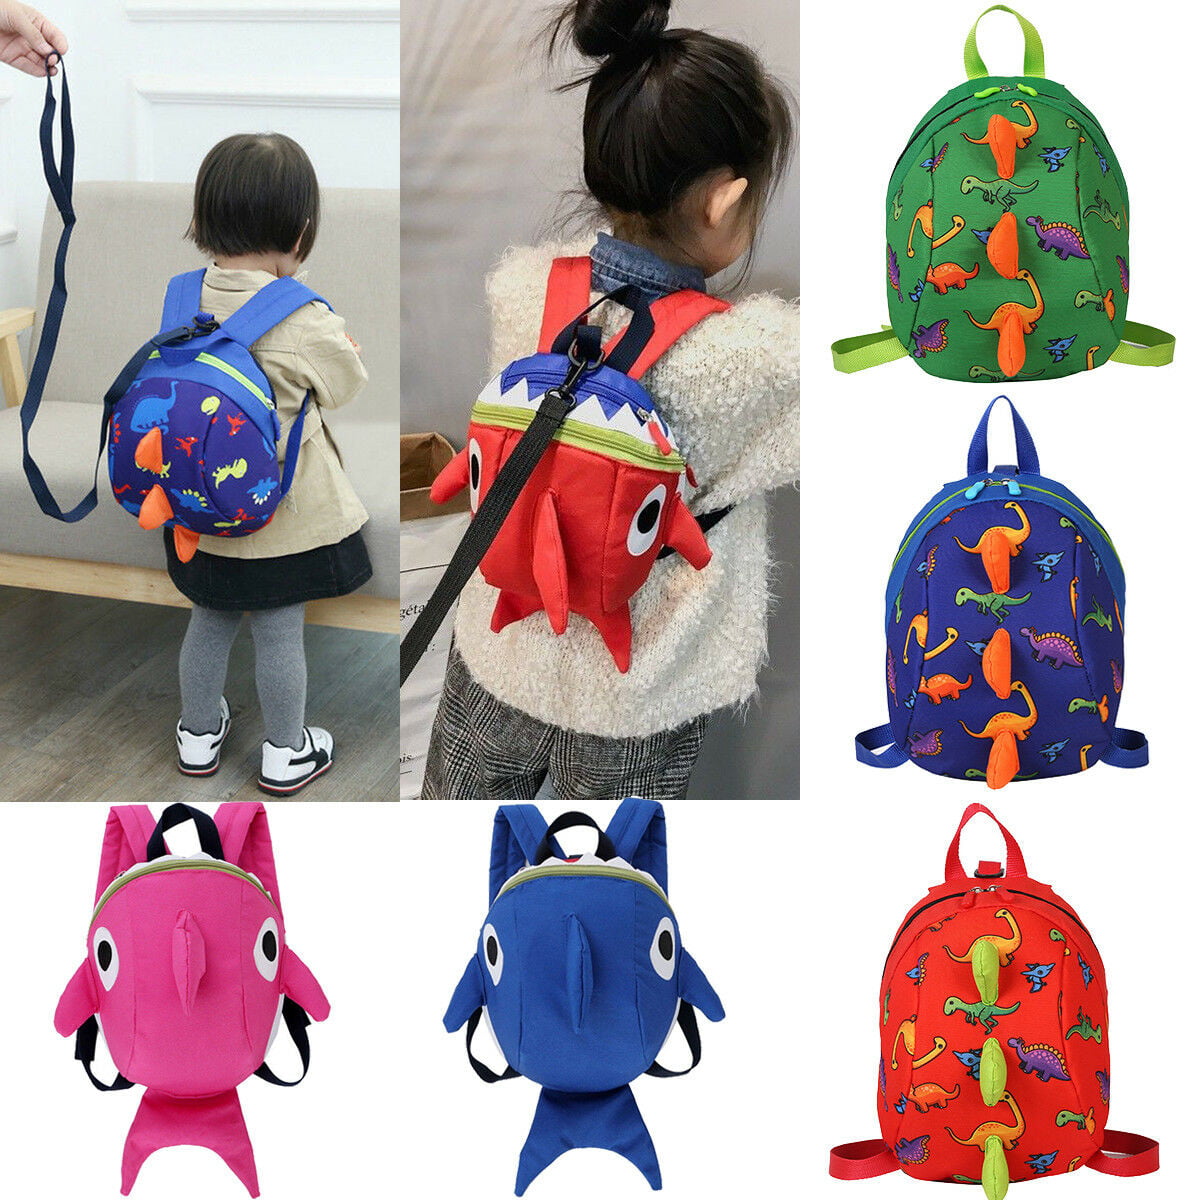 Anti-Lost Backpack with Safety Harness Straps,Walking Safety Cute Design Travel Bag with Toddler Leash for Little Kids Age 1-5 Years Old Boys and Girls Pink 